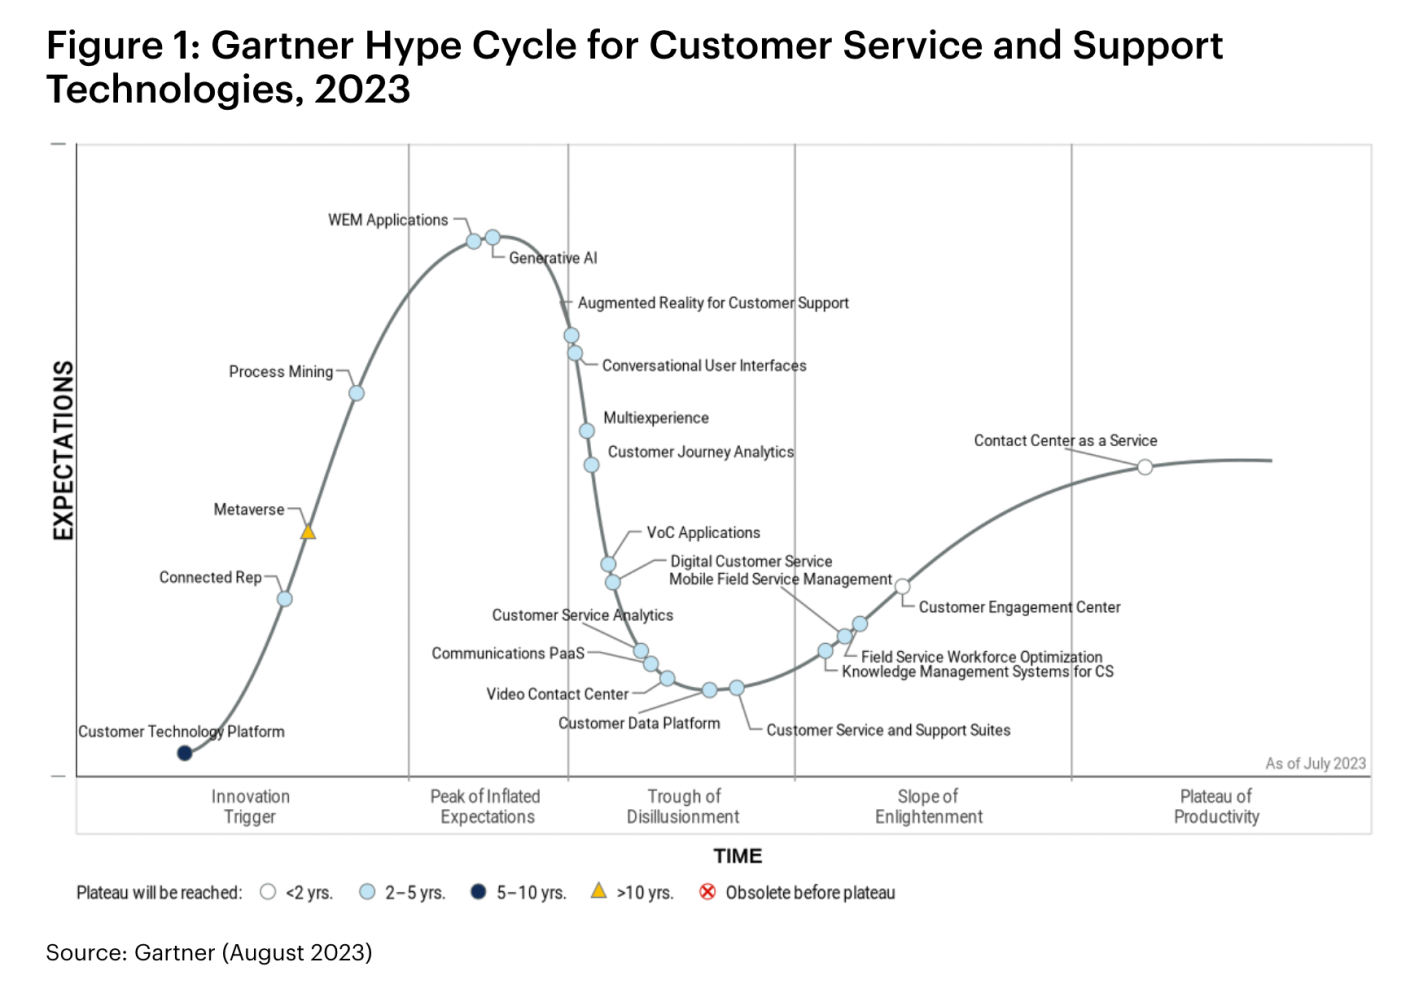 Gartner Hype Cycle for Customer Service and Support Technologies